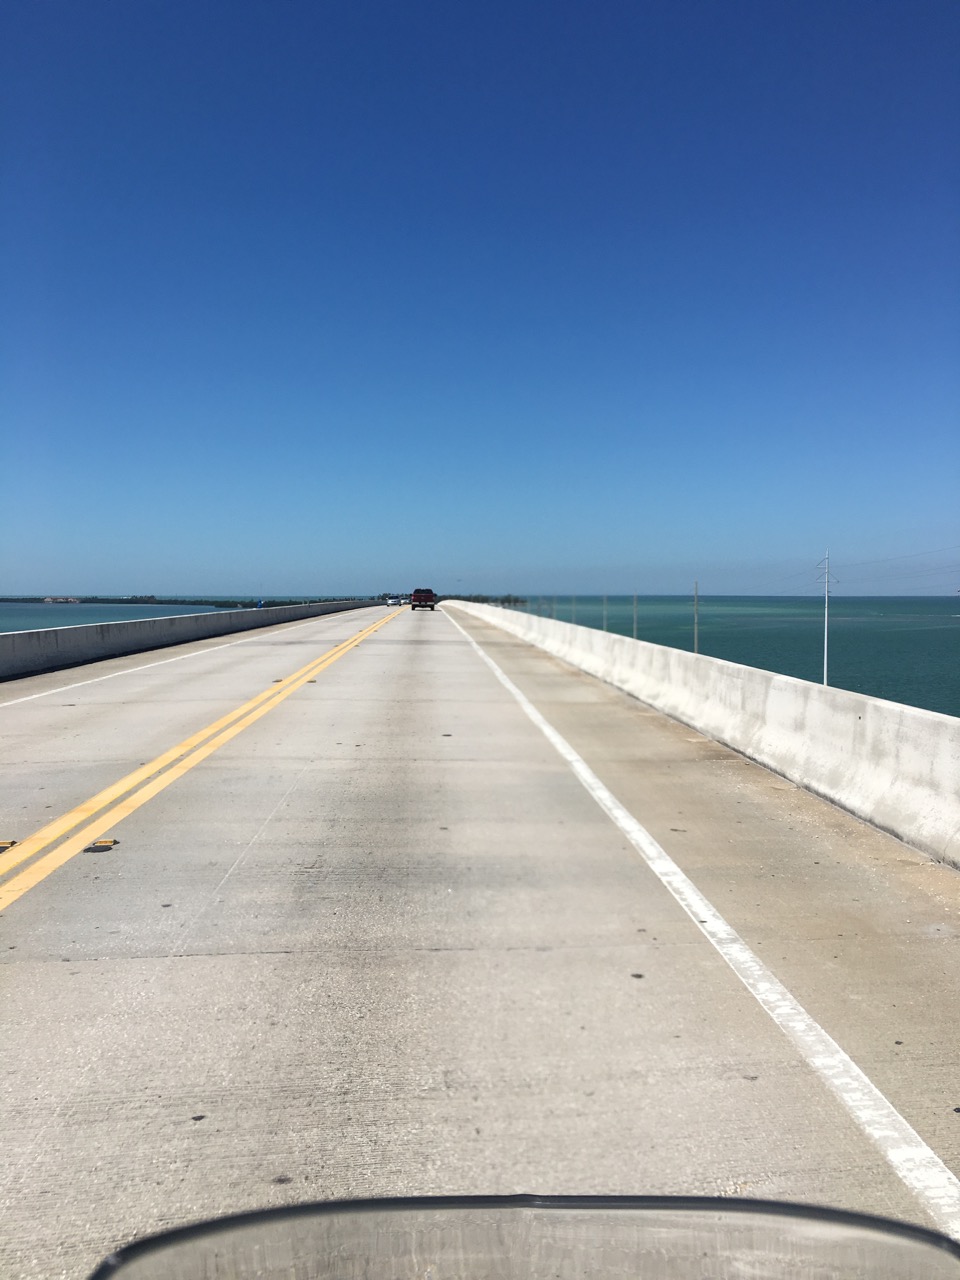 Cell phone pic of overseas highway